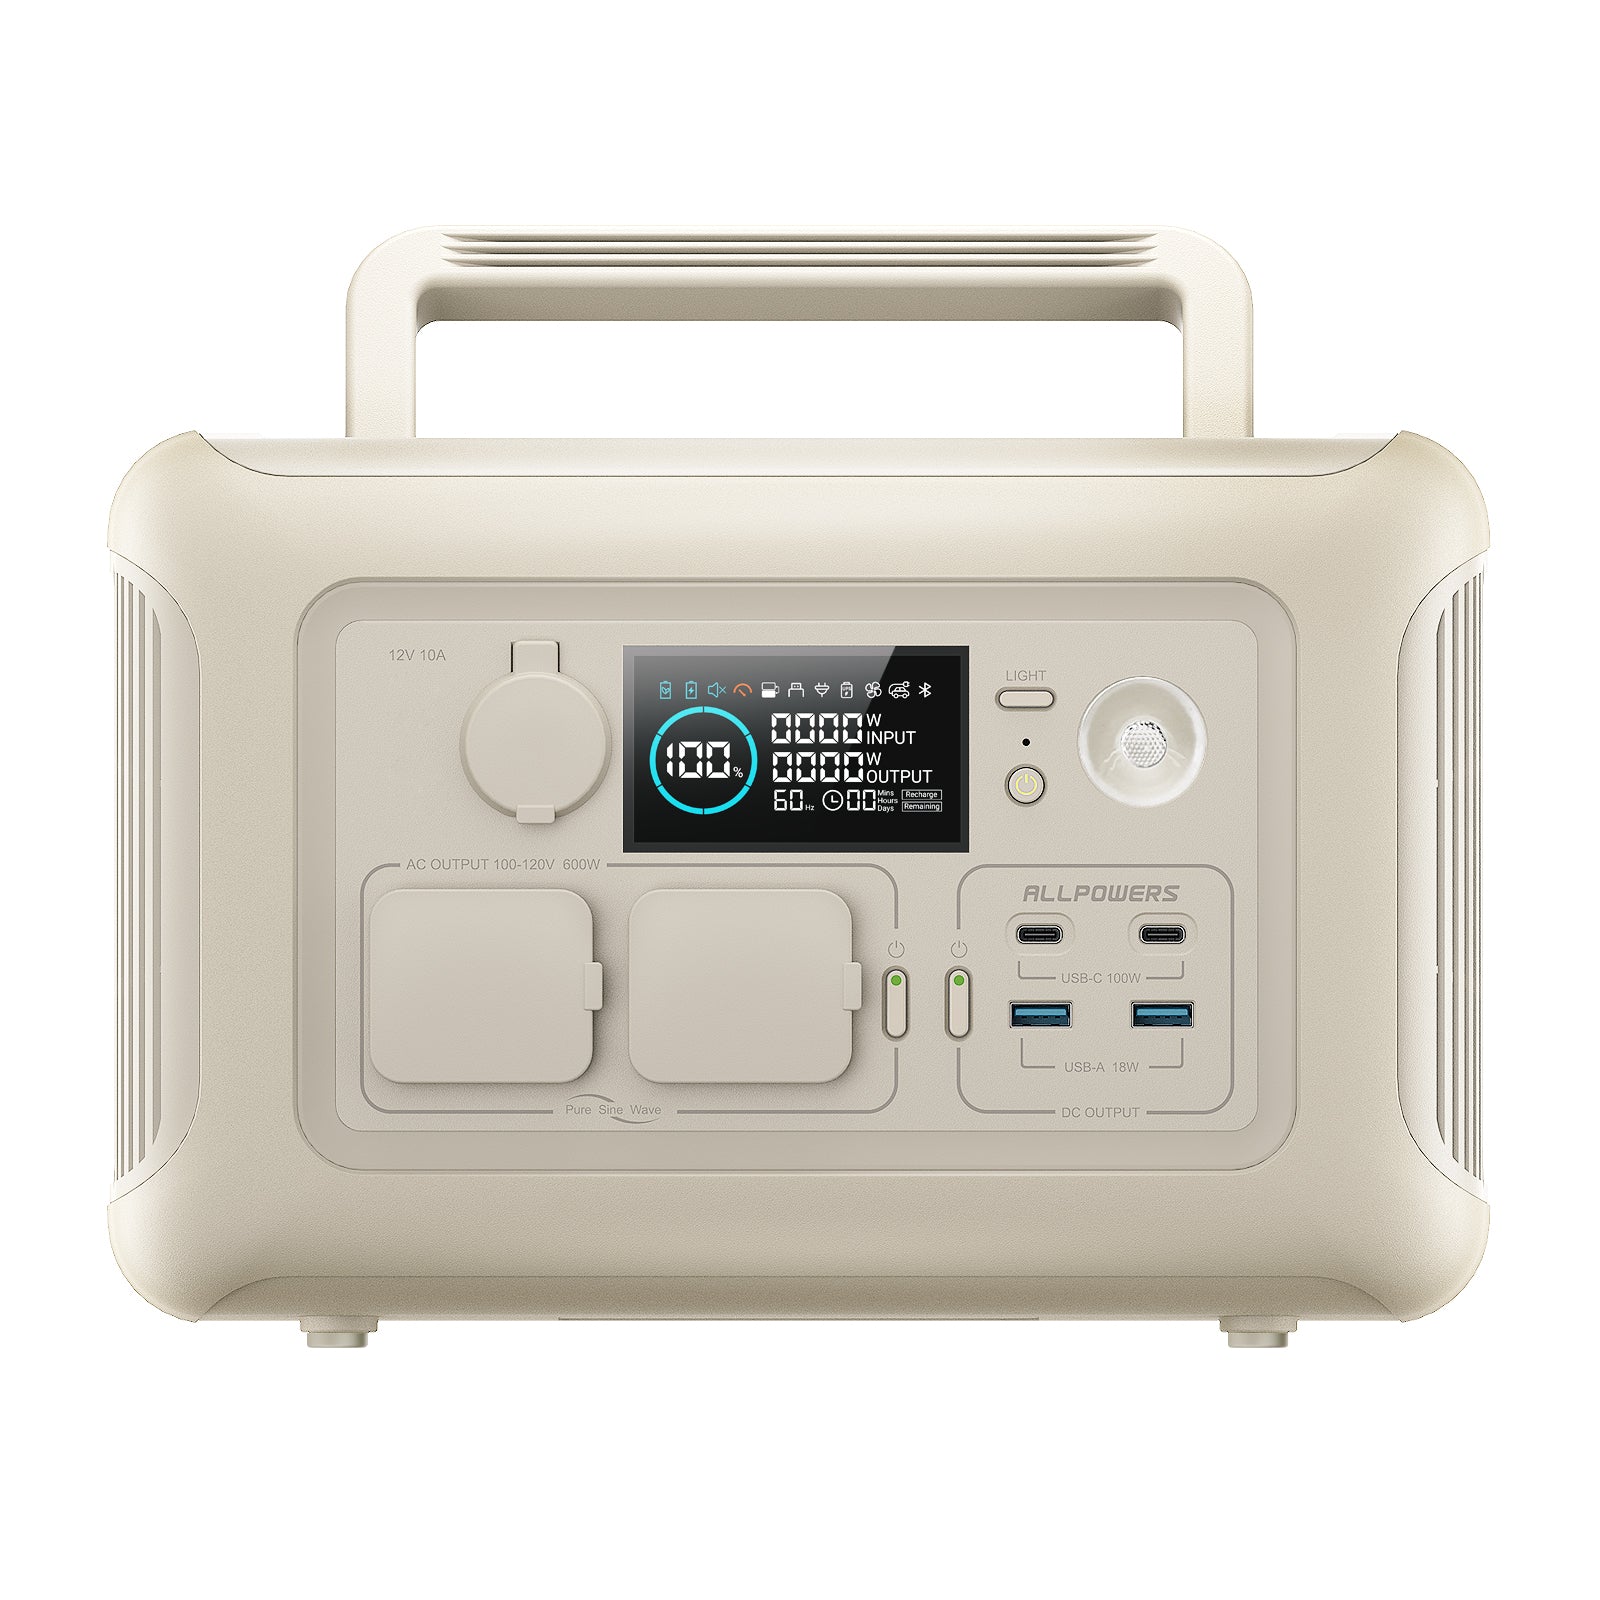 ALLPOWERS R600 Portable Power Station 600W 299Wh LiFeP04 Battery Beige Color